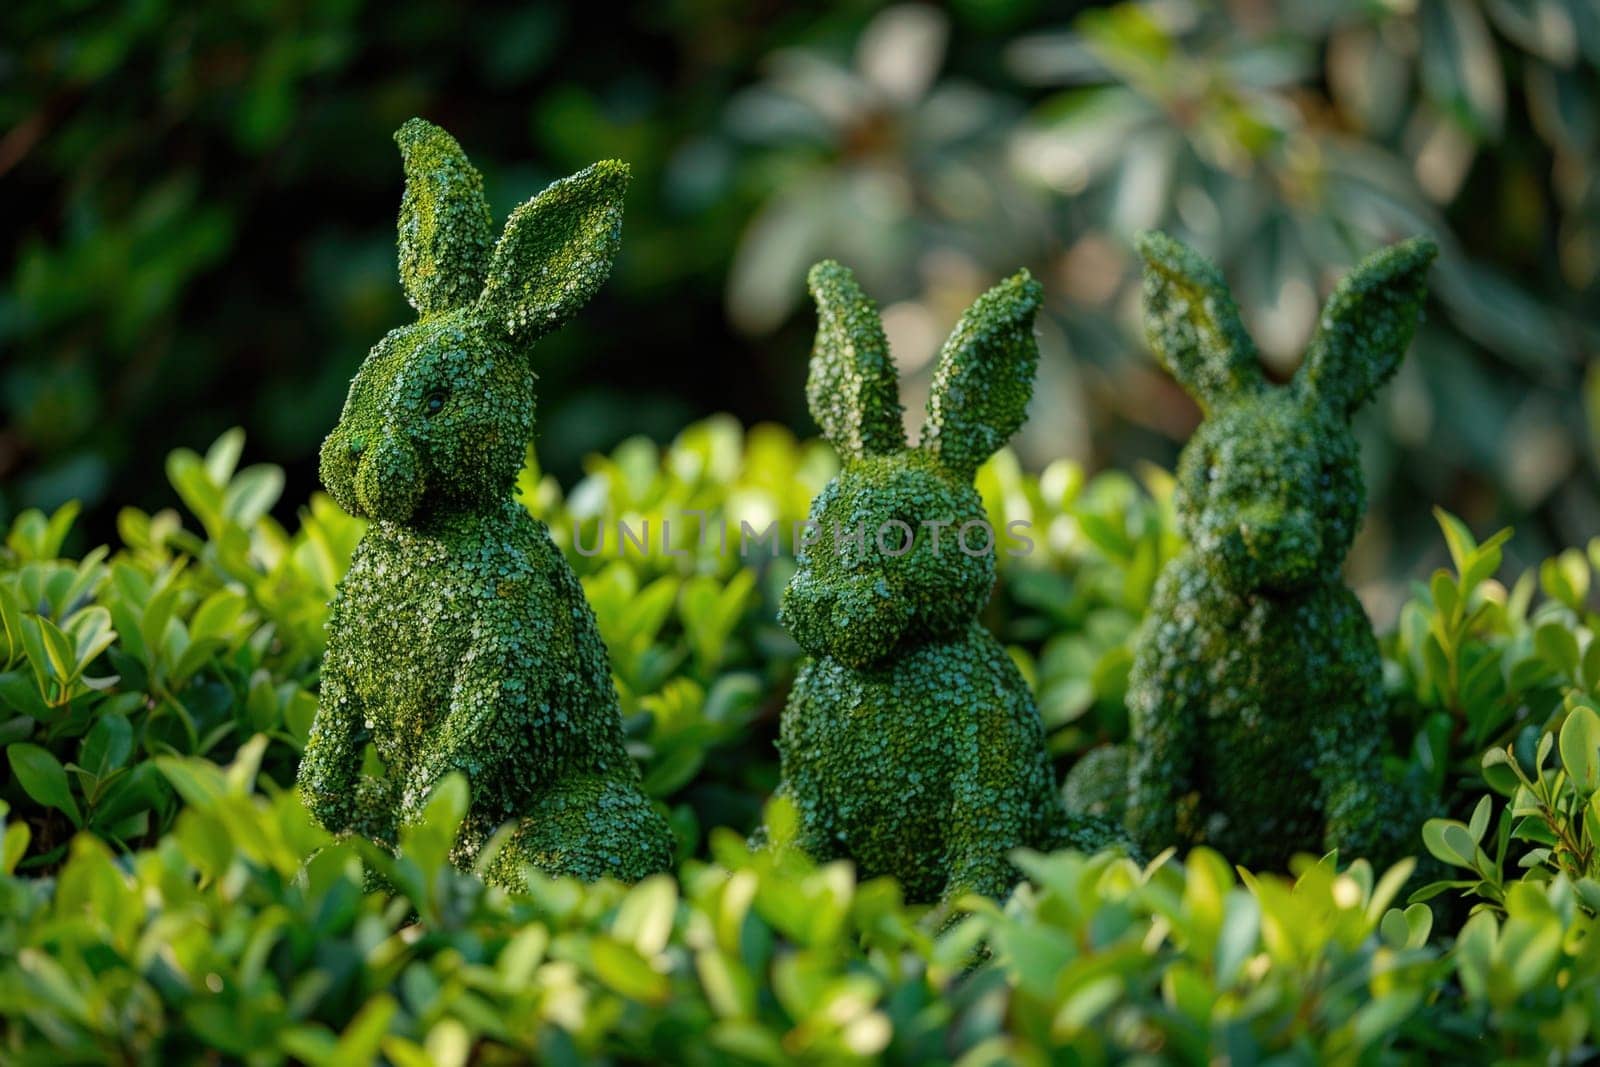 Three rabbits sitting in the middle of a green hedge in the garden, nature, animals, outdoors, relaxation, peaceful